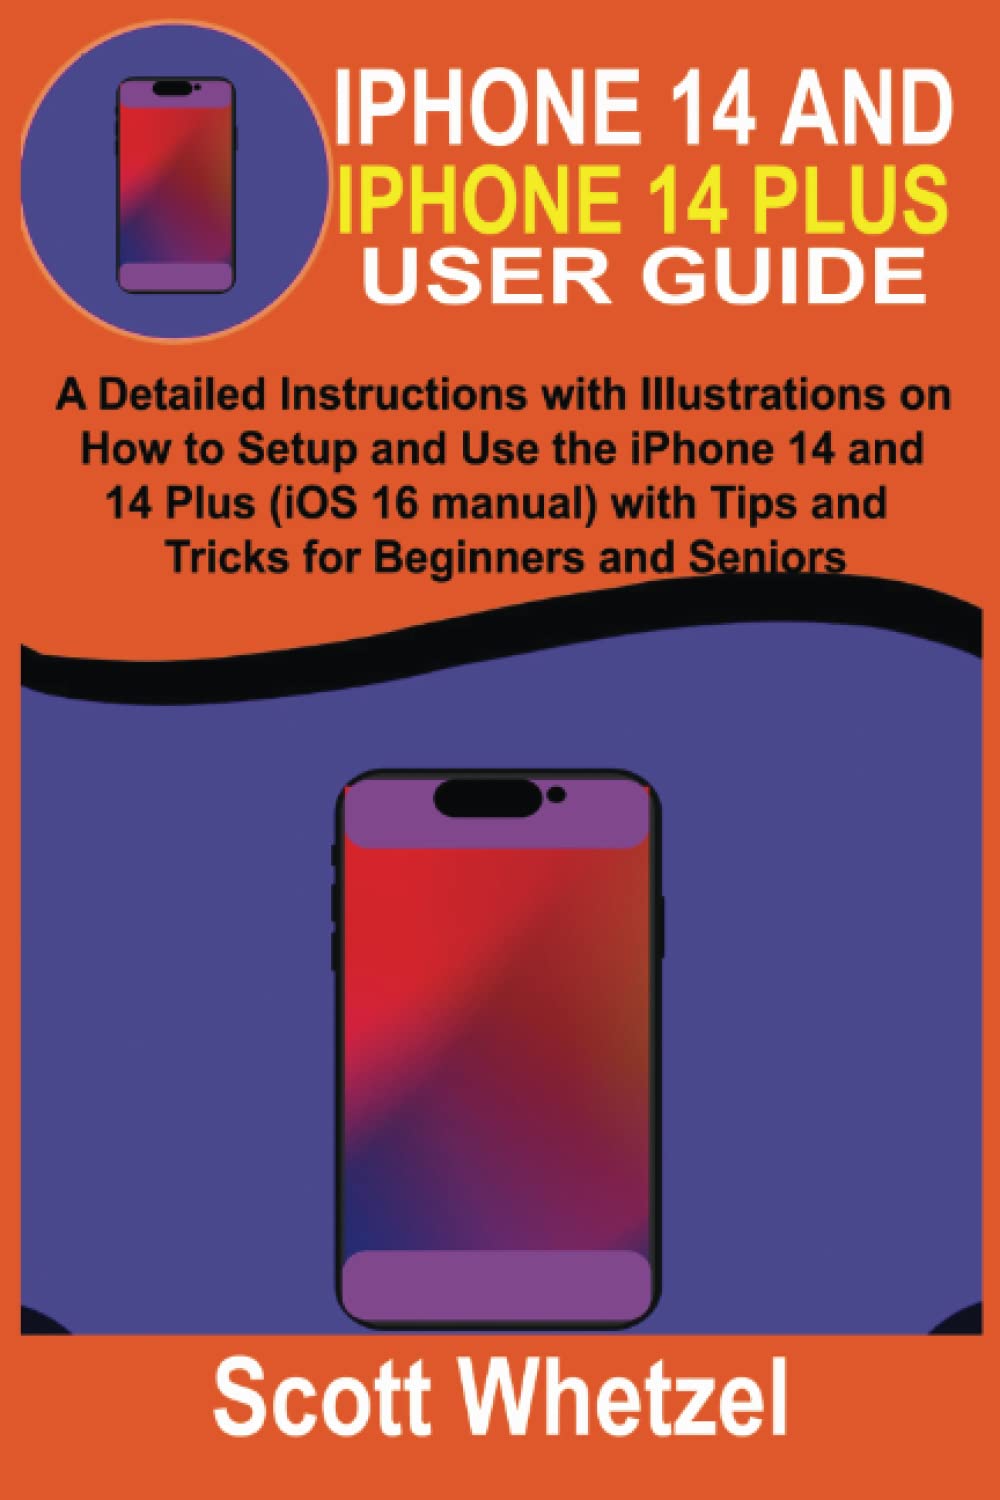 IPHONE 14 AND IPHONE 14 PLUS USER GUIDE: A Detailed Instructions with Illustrations on How to Setup and Use the iPhone 14 and 14 Plus (iOS 16 manual) with Tips and Tricks for Beginners and Seniors